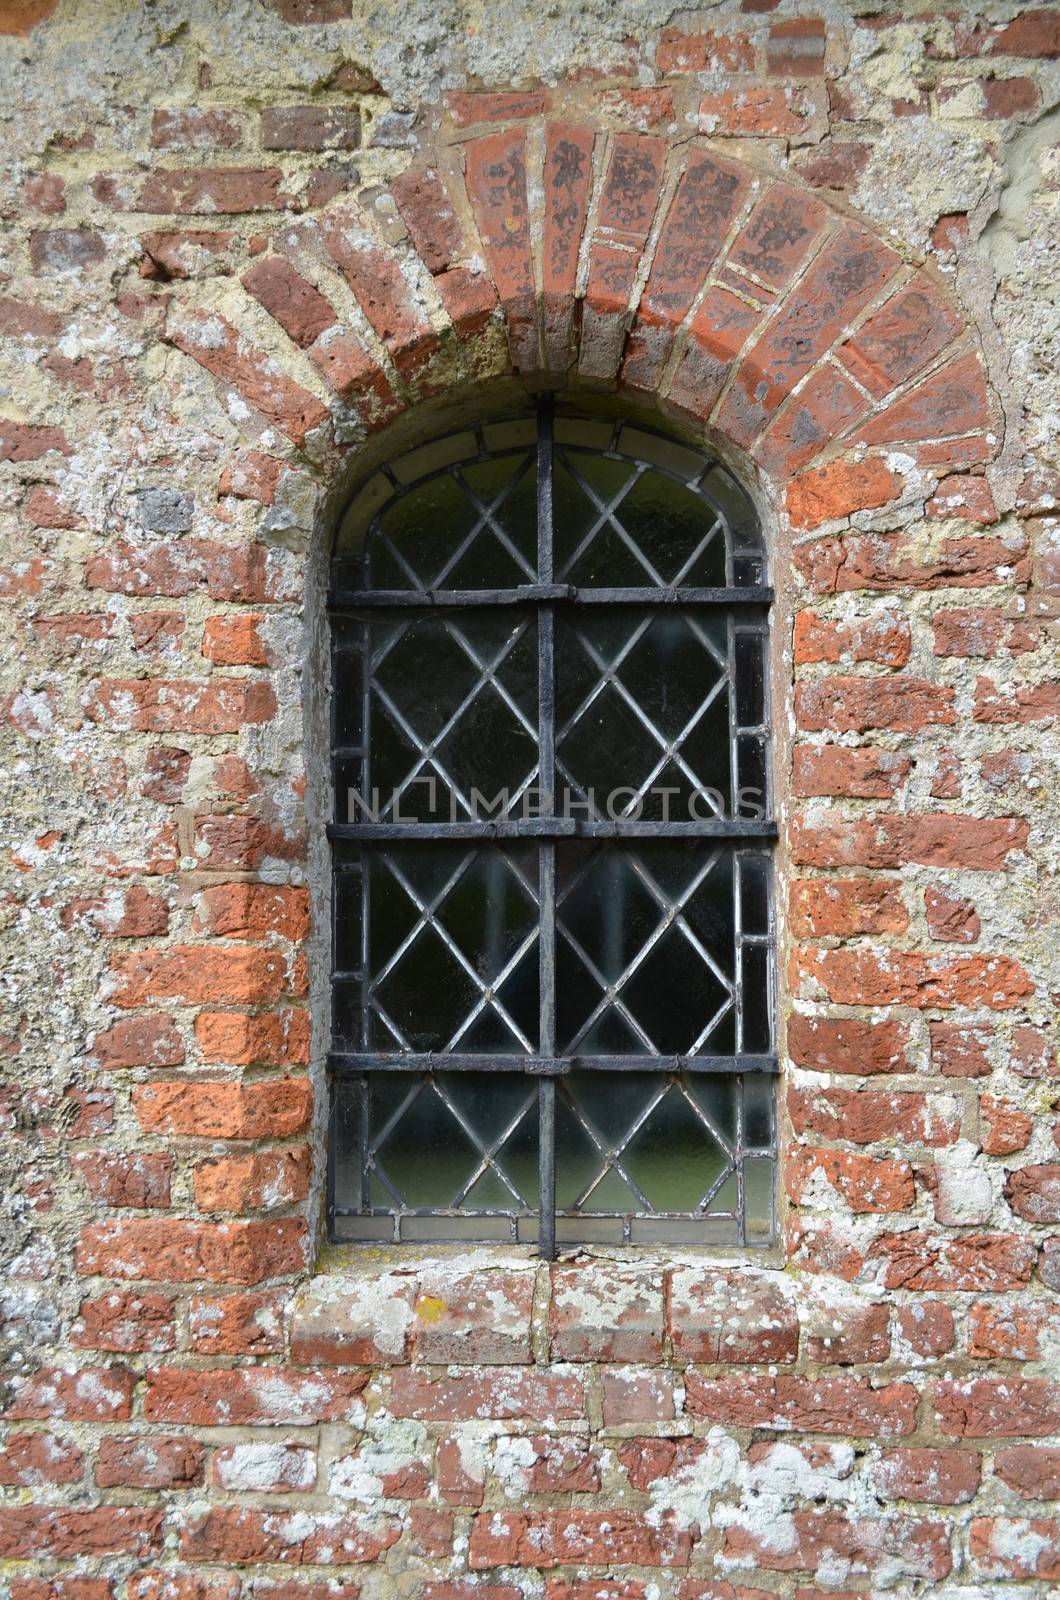 Brick built window, 1600 period with its patterned leaded glass.Image taken from St Peters church in Twineham,Sussex,England.